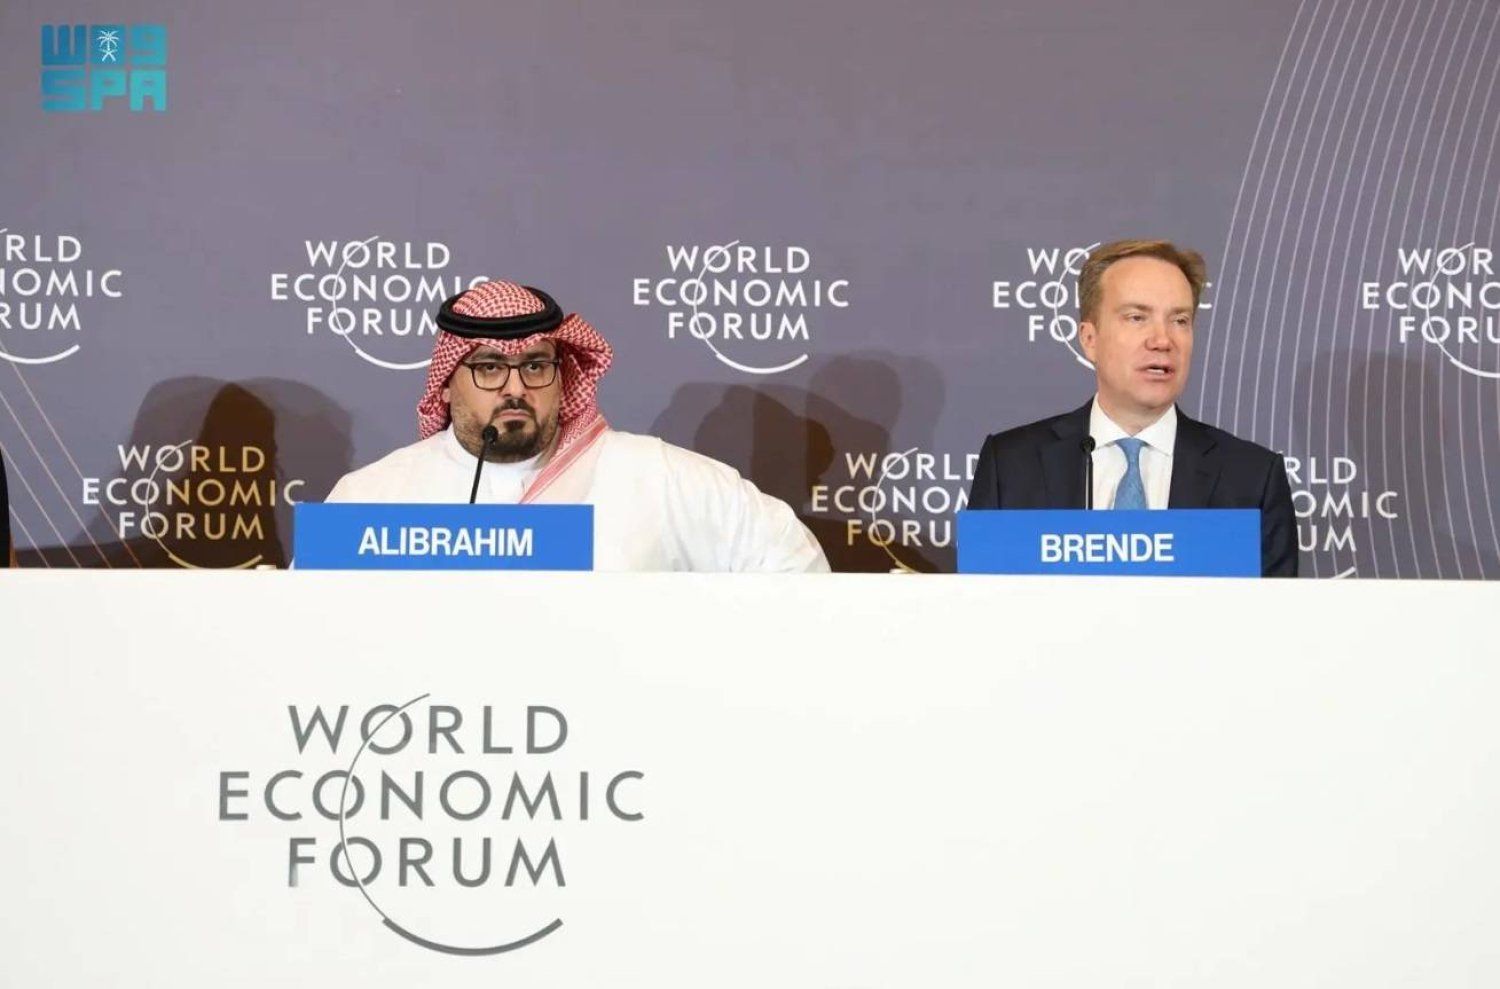 Saudi Minister of Economy and Planning Faisal bin Fadhil Alibrahim and WEF President Borge Brende. SPA